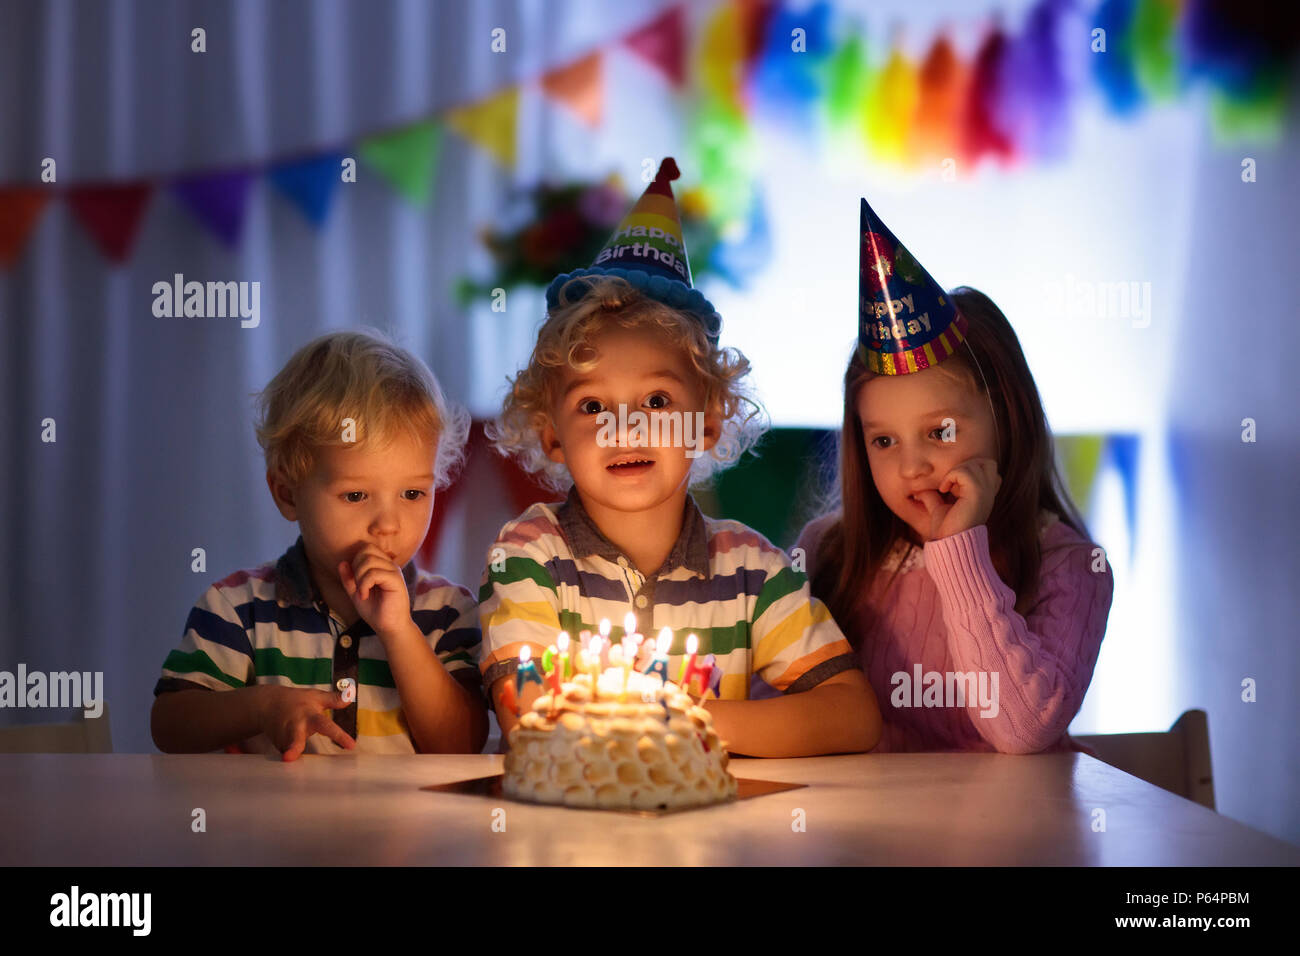 Kids birthday party. Children blow out candles on cake in dark room. Rainbow decoration and table setting for kids event, banner and flag. Girl and bo Stock Photo